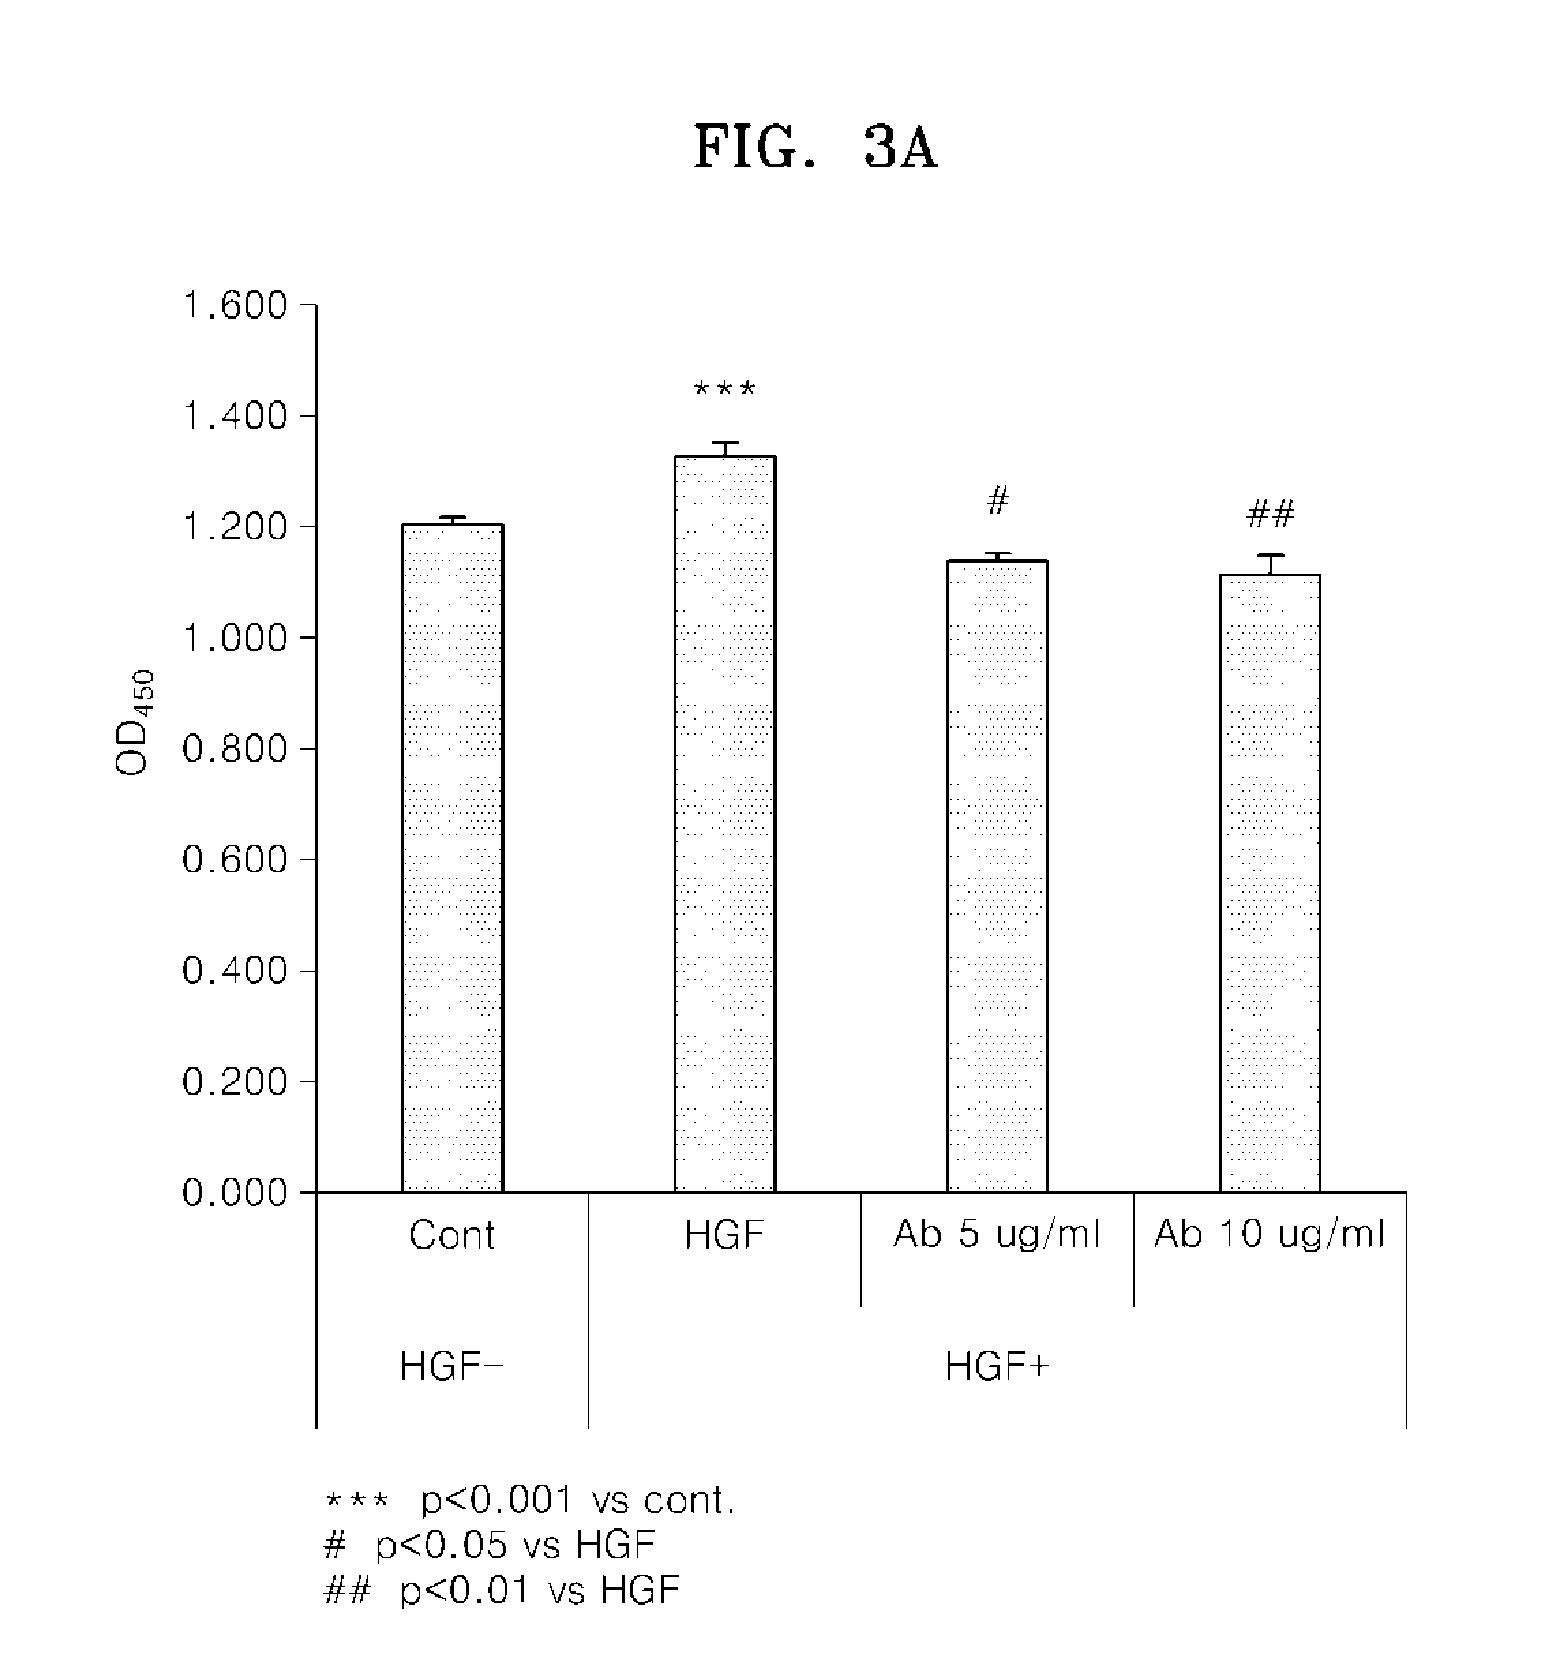 Antibody specifically binding to c-met and use thereof